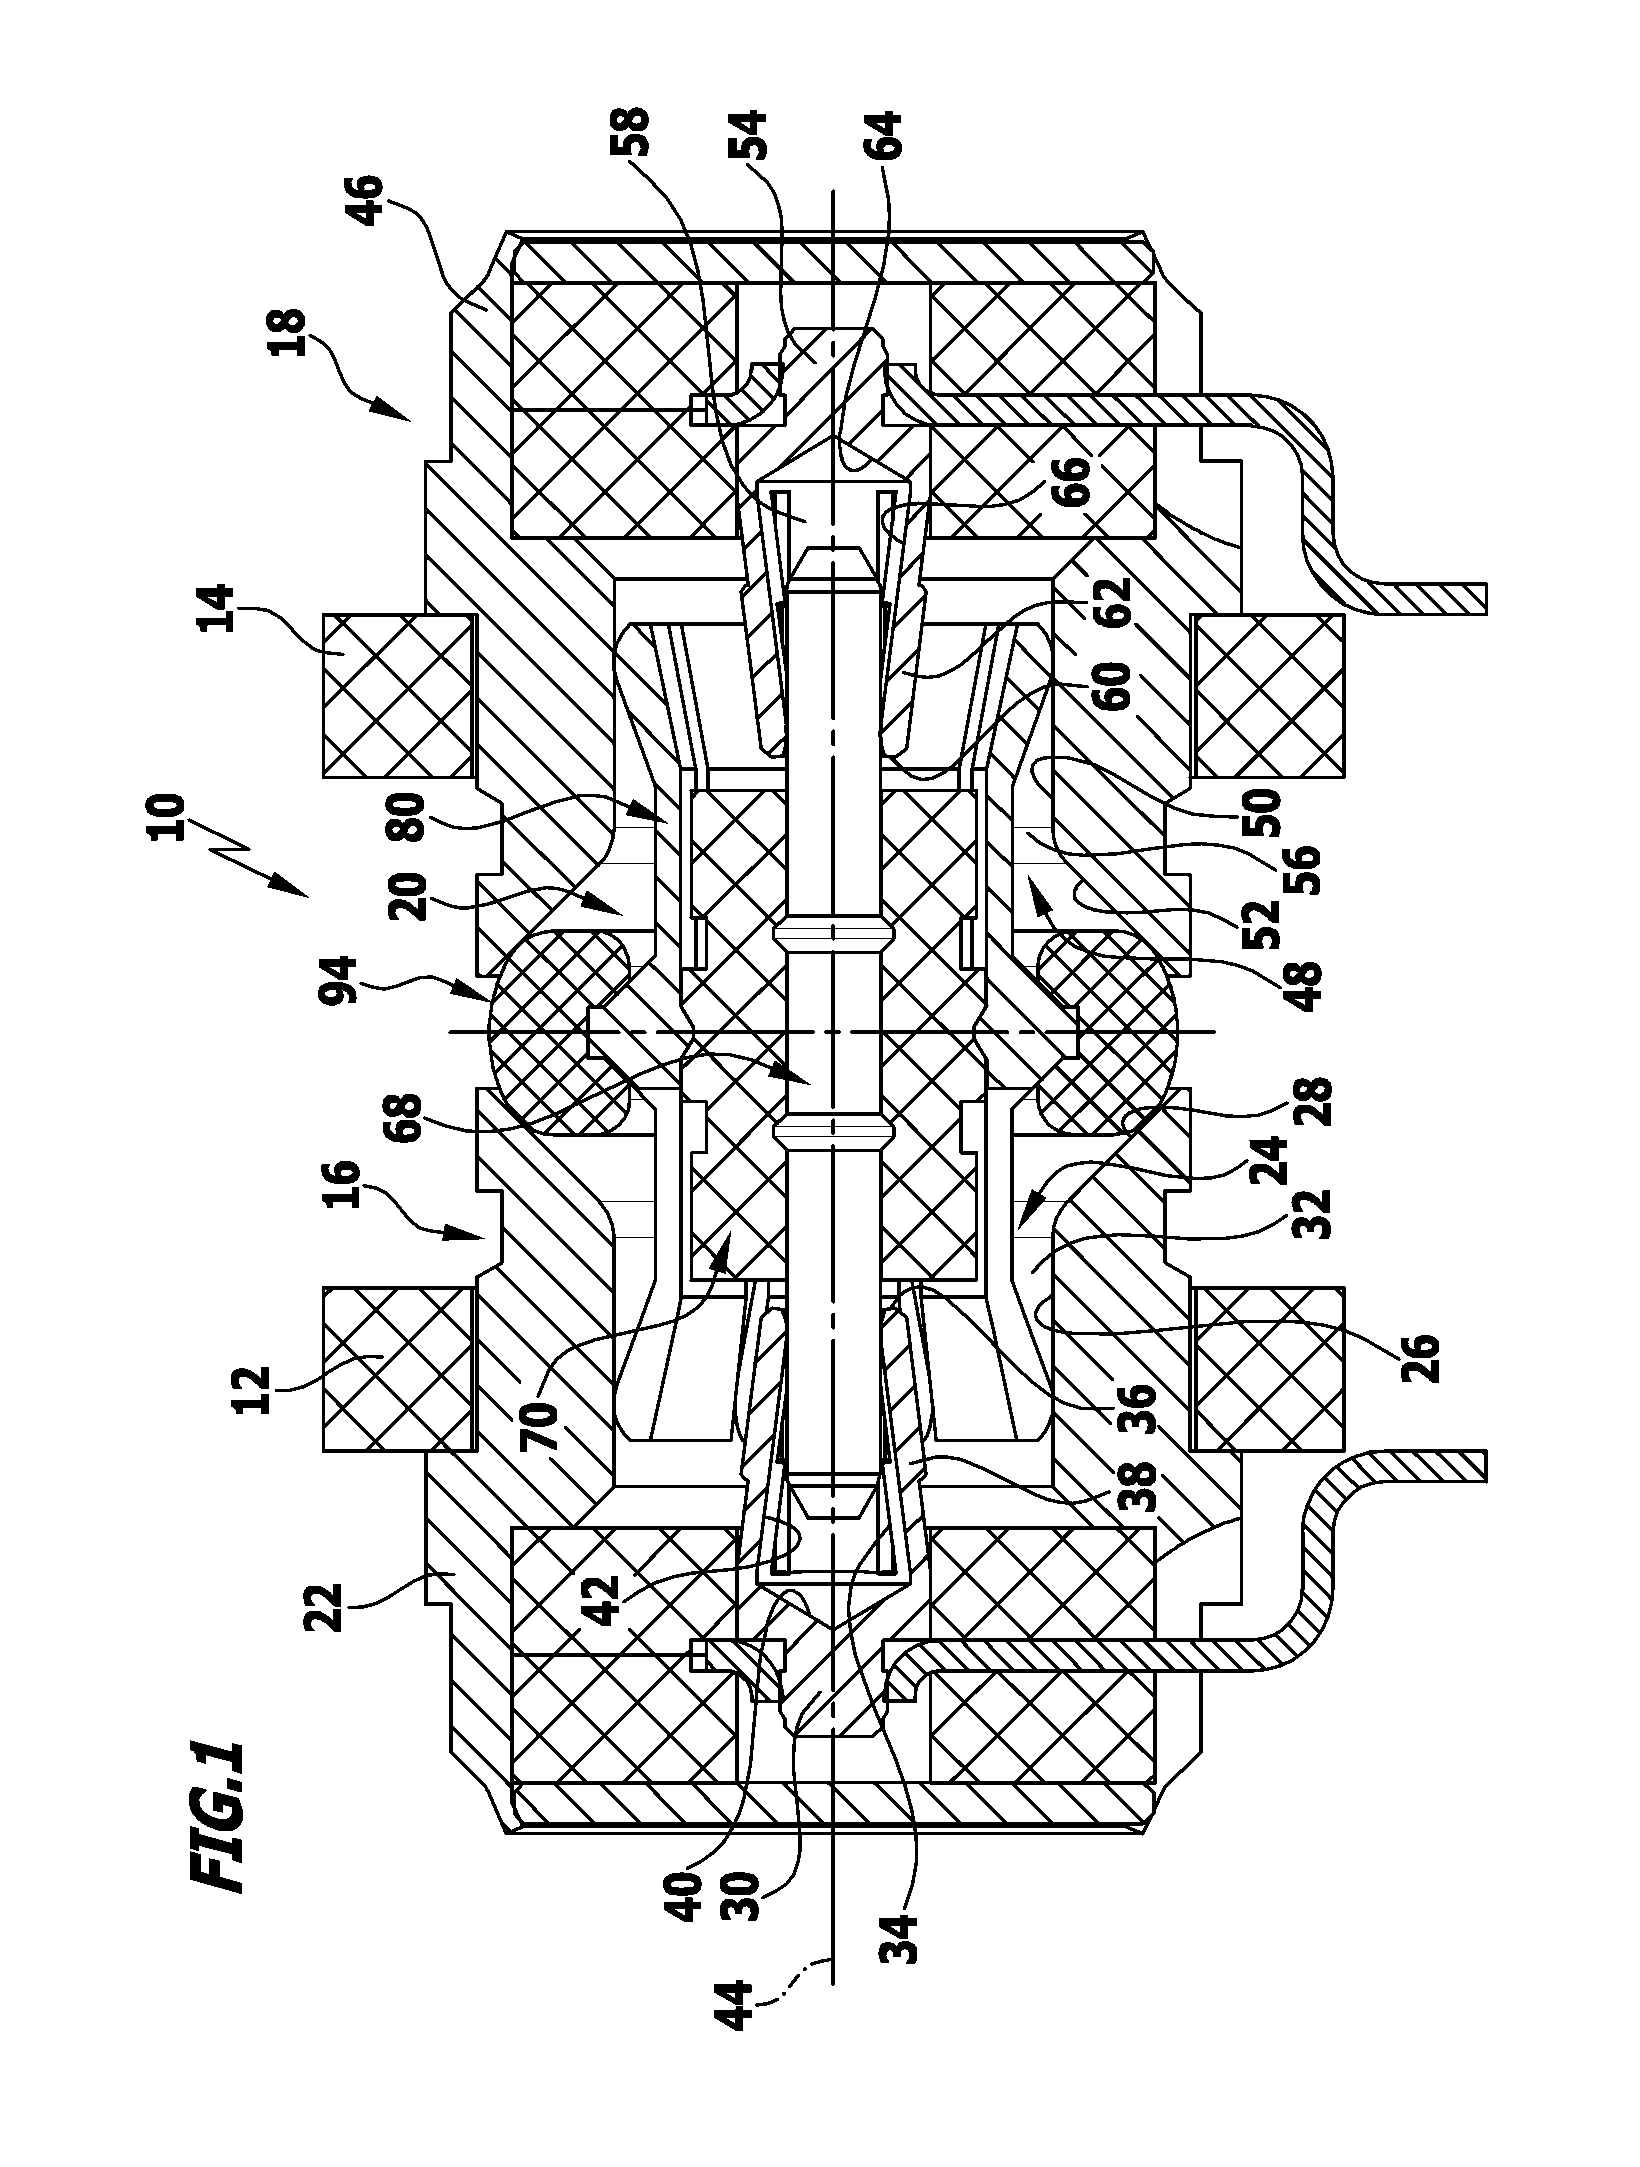 Connecting device for electrically connecting two circuit boards